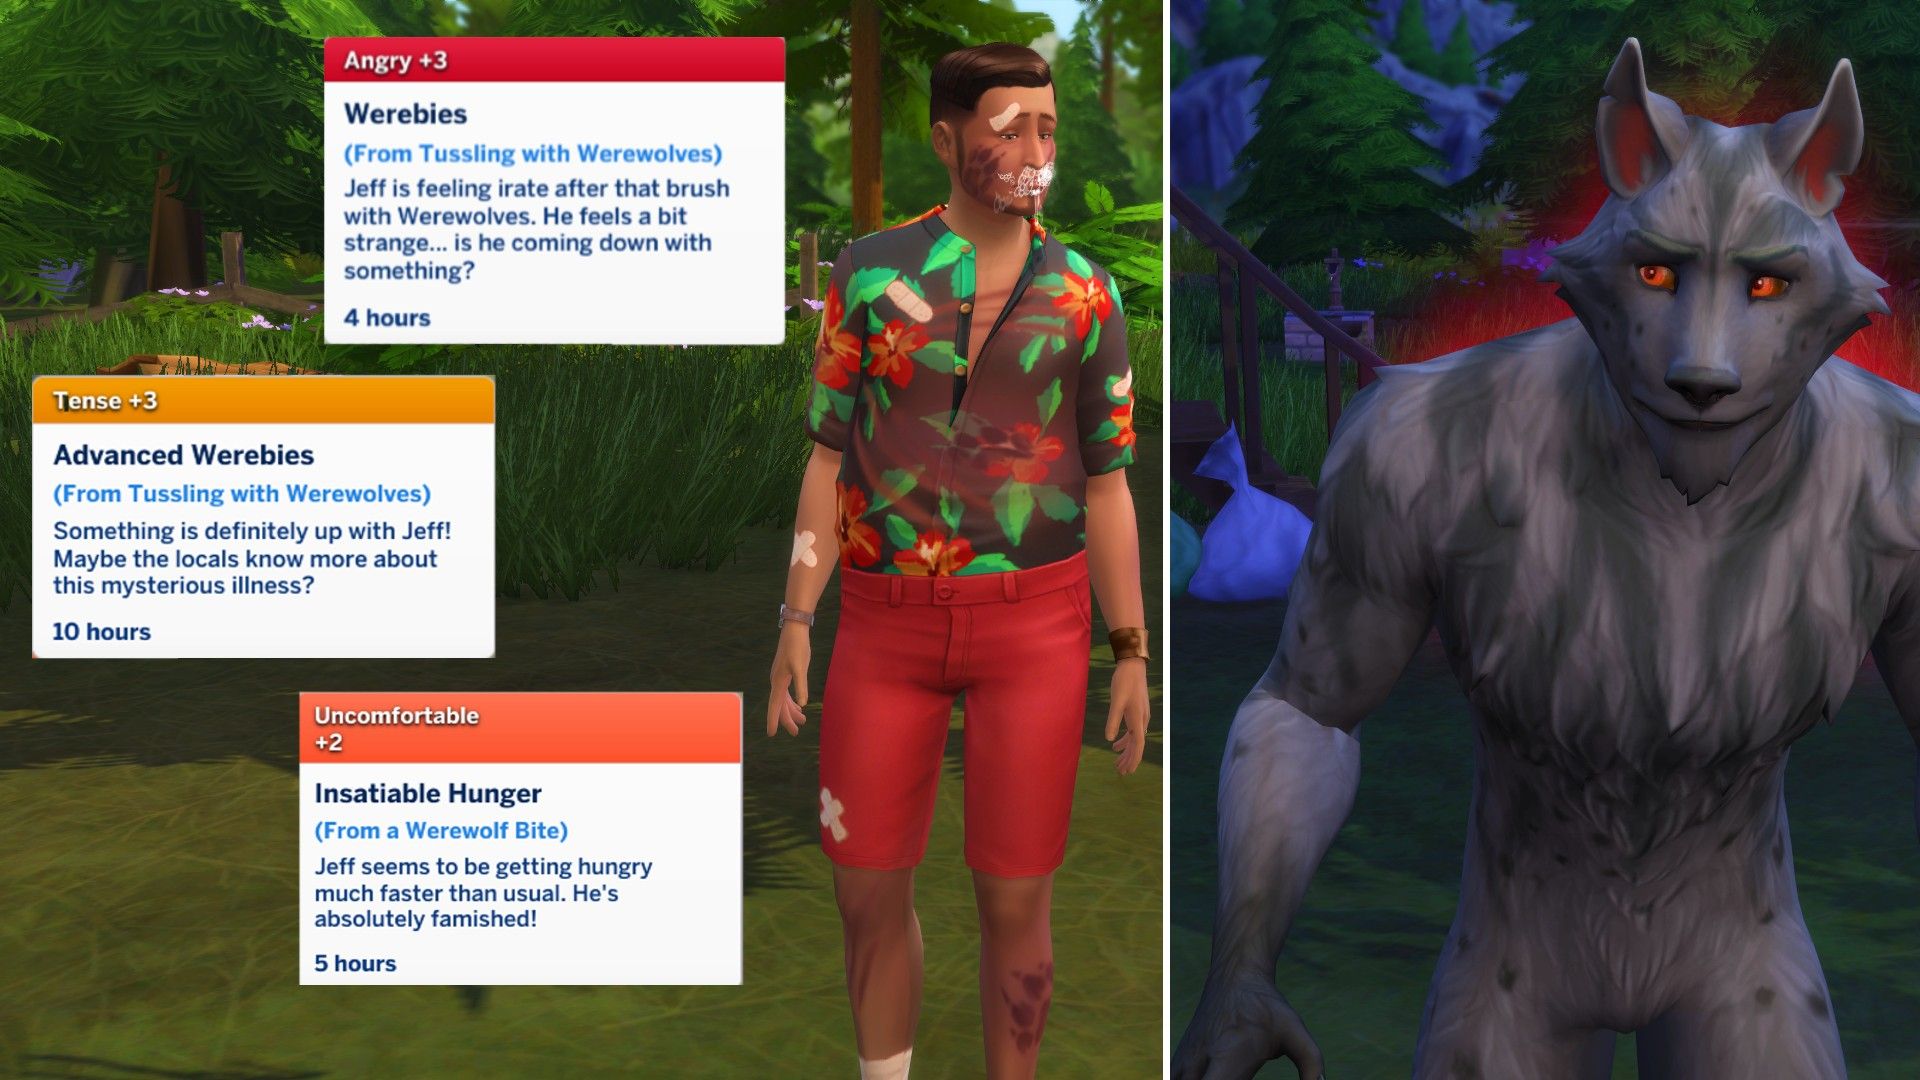 The stages of Wererabies and Greg from Sims 4 Werewolves